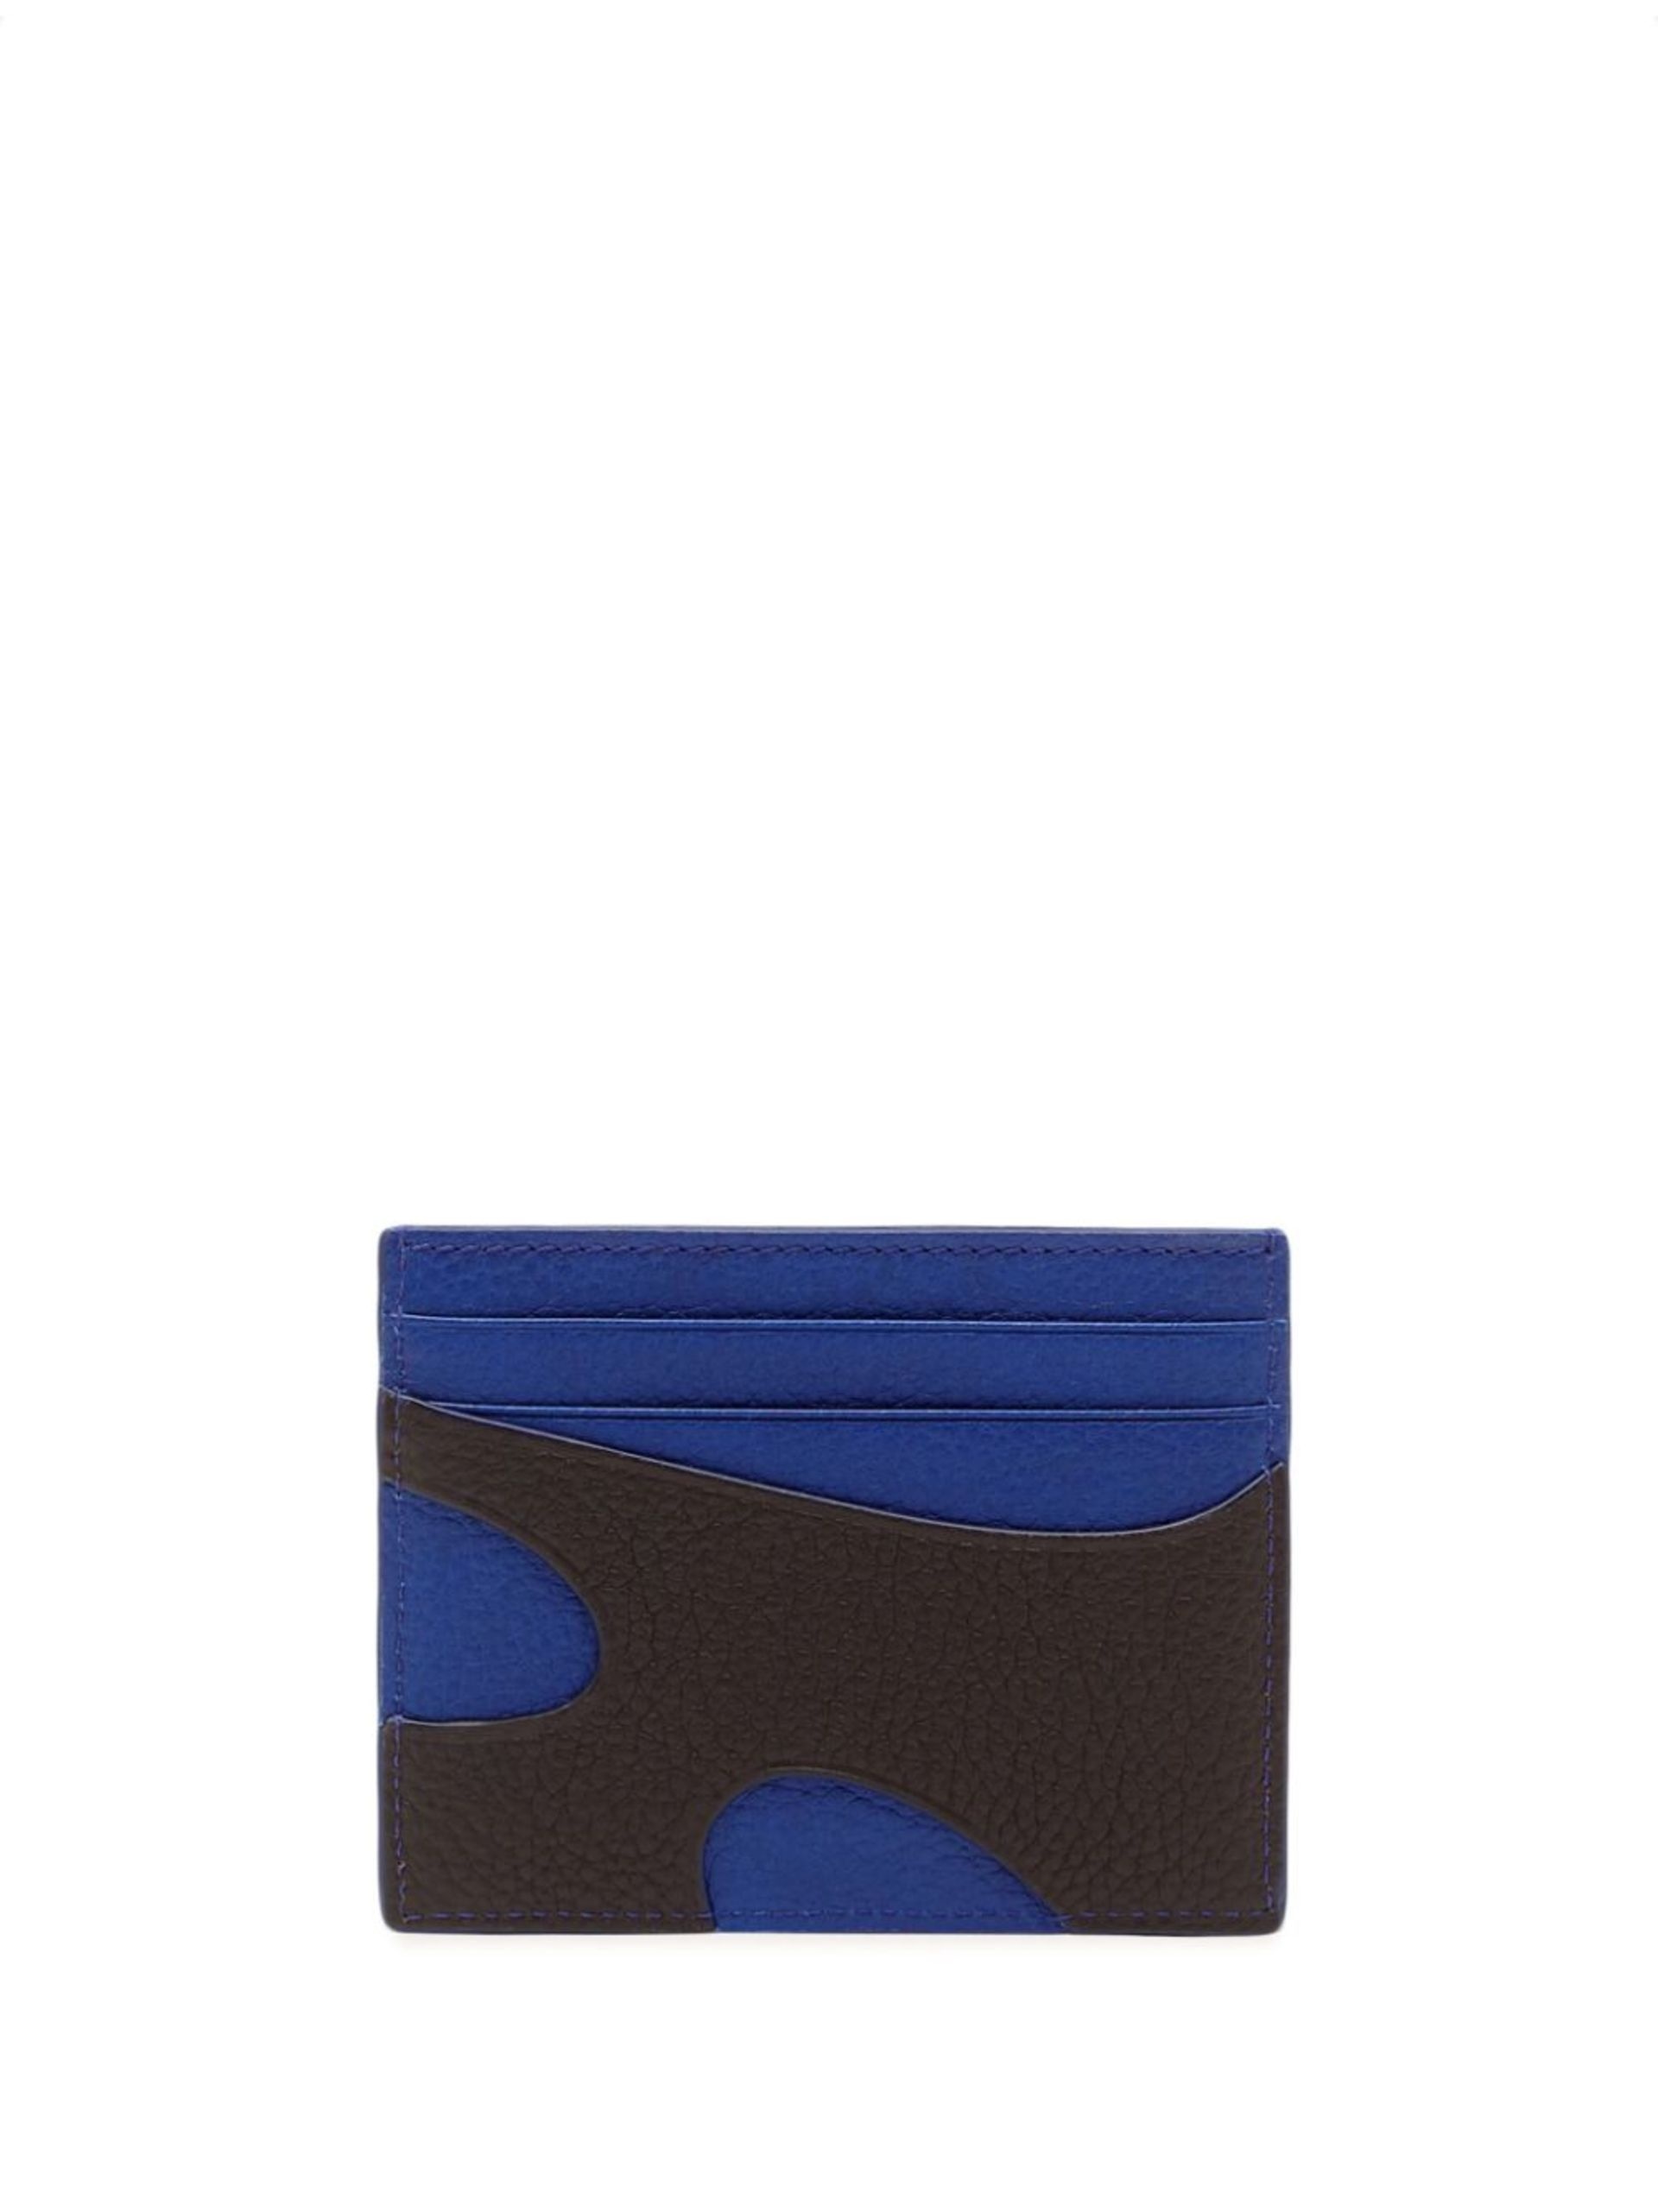 blue cut-out leather card holder - 2